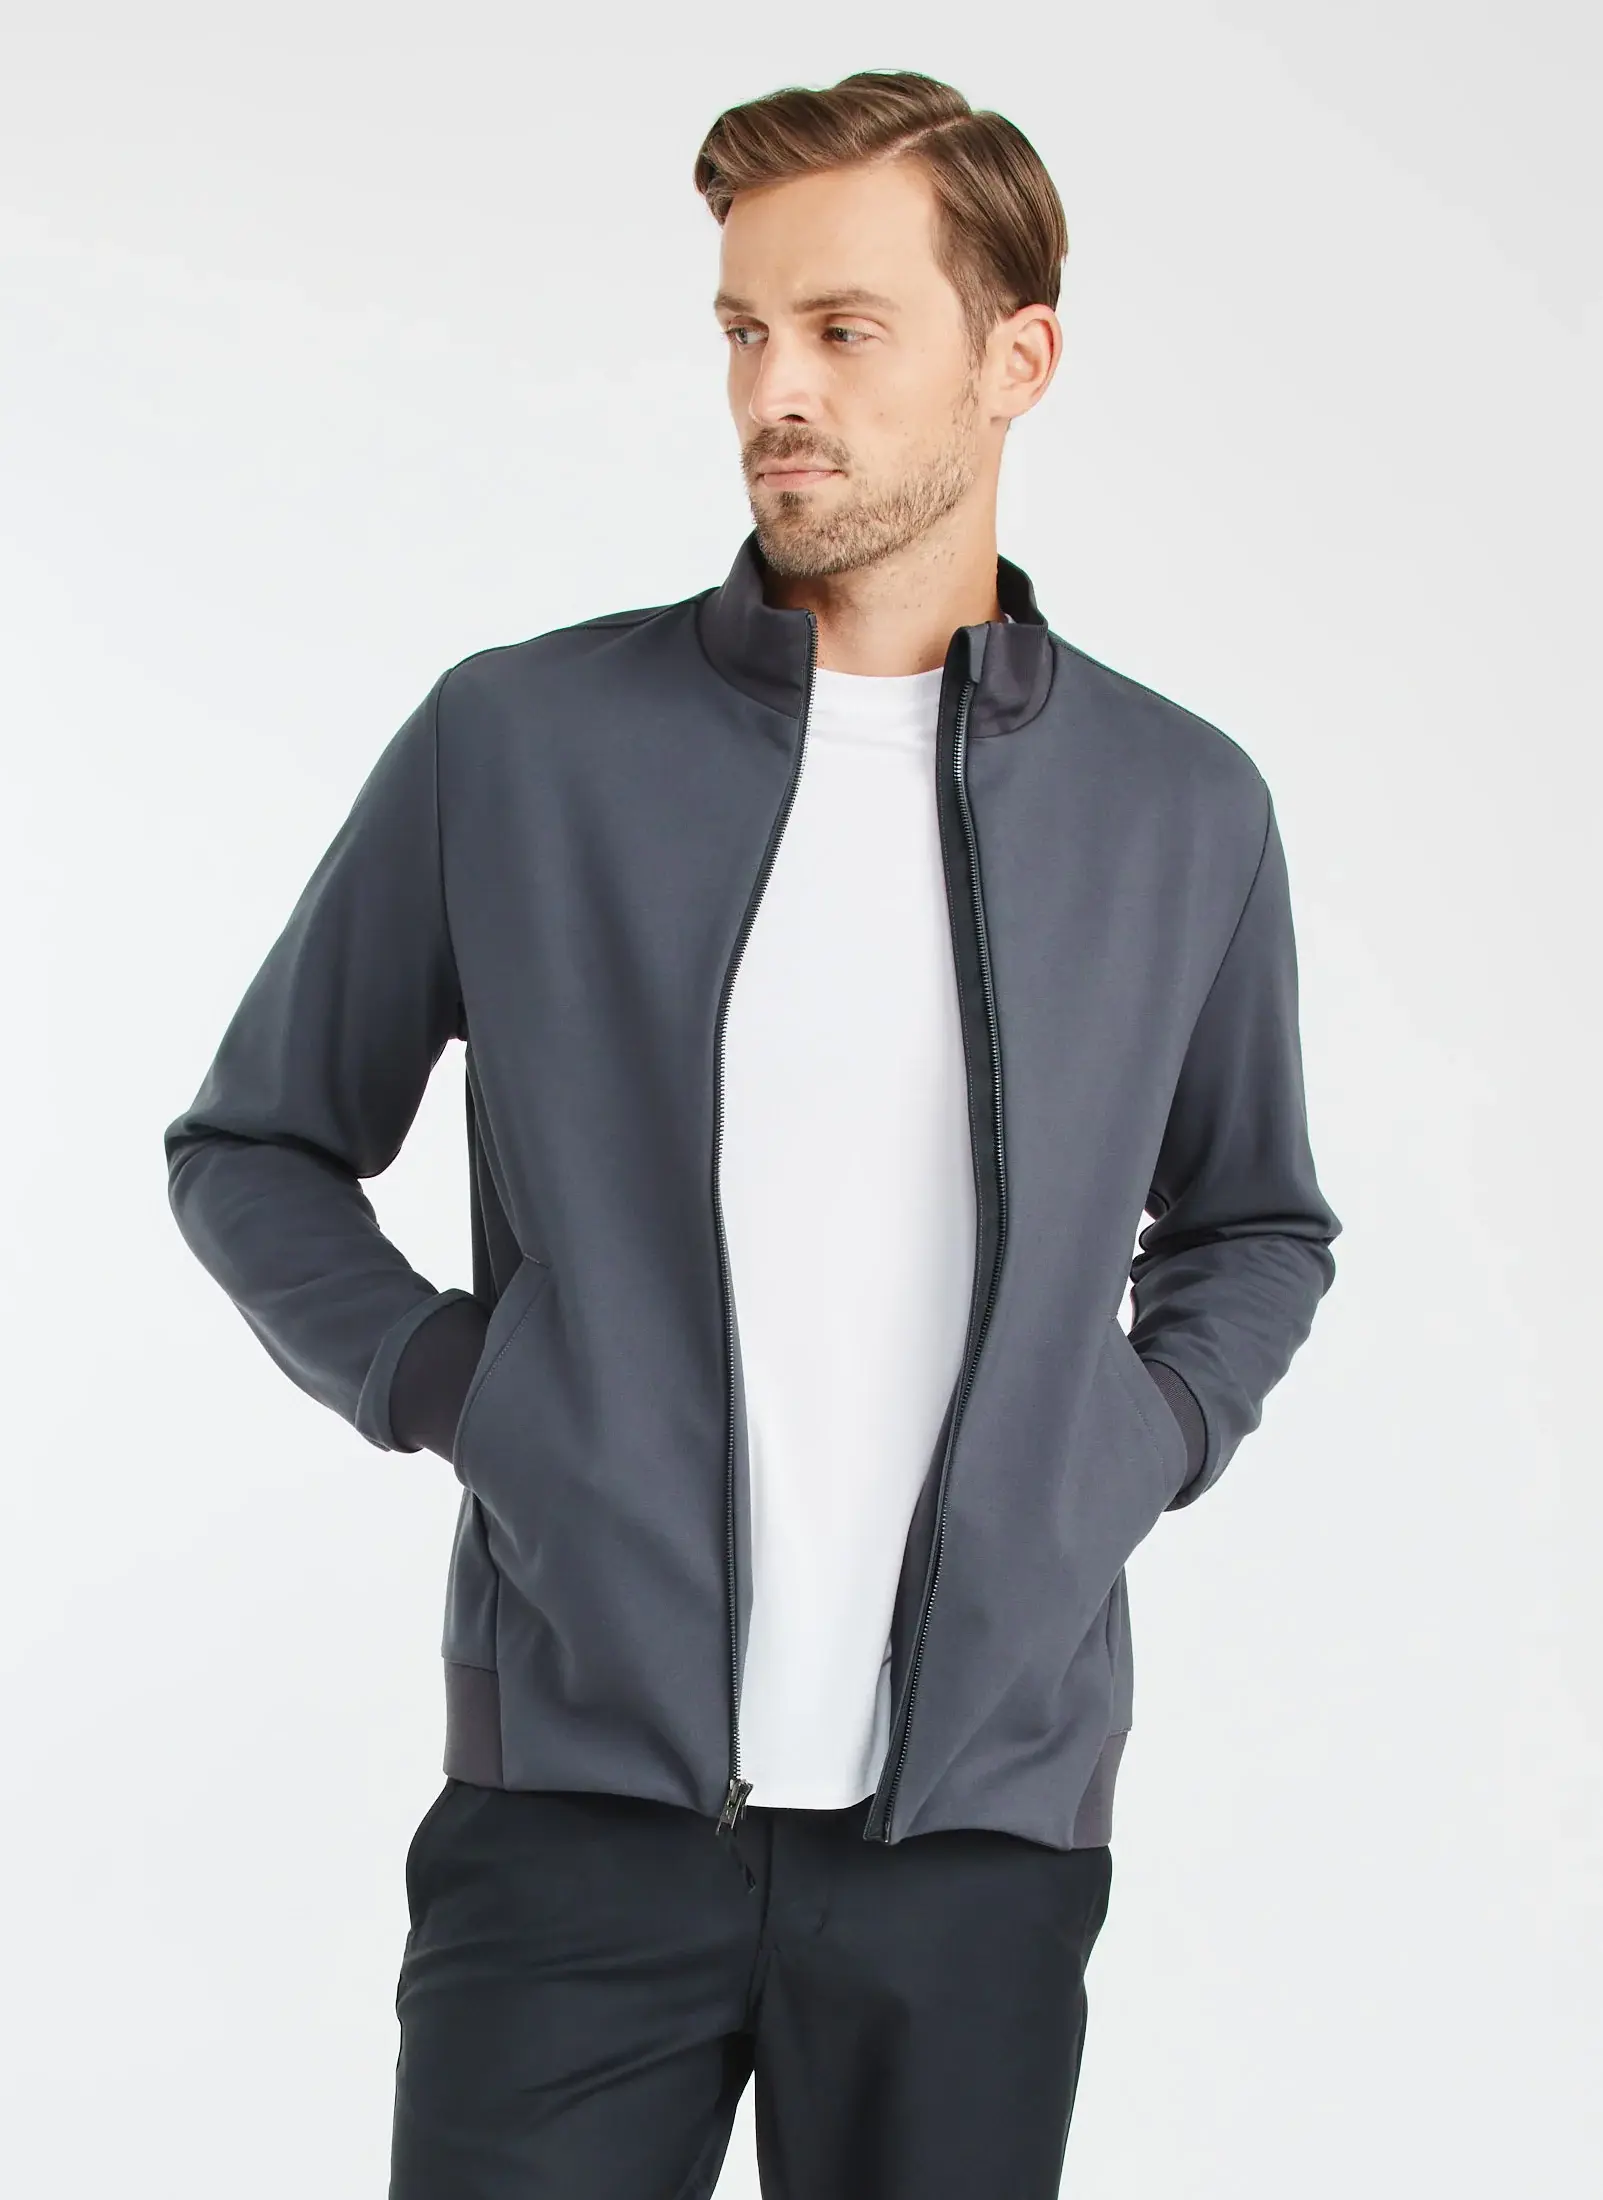 Kit And Ace Comfort Bomber Jacket. 1